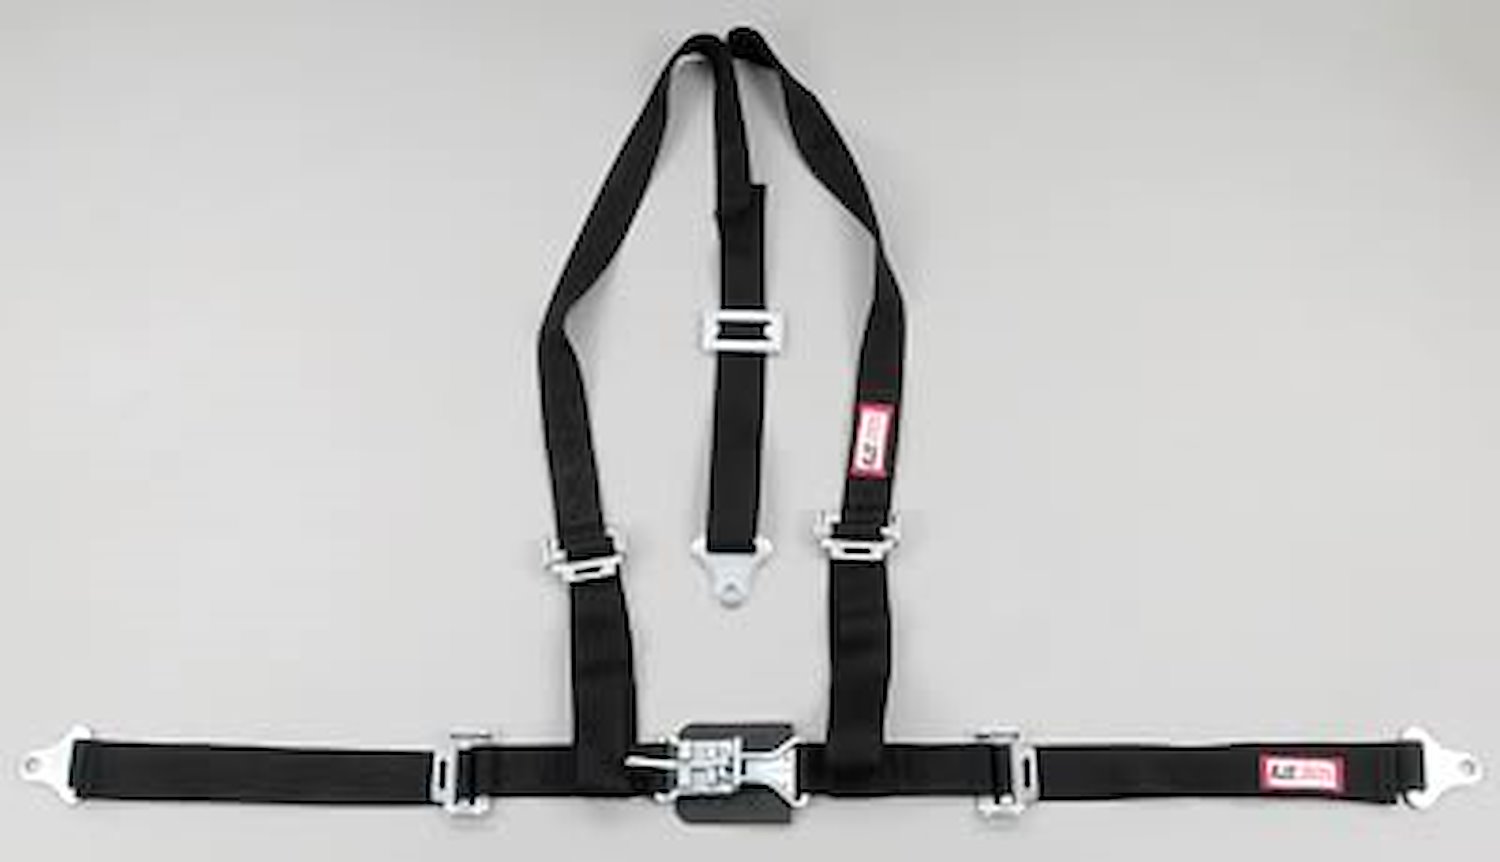 NON-SFI L&L HARNESS 2 PULL DOWN Lap Belt SNAP SEWN IN 2 S.H. INDIVIDUAL FLOOR Mount w/STERNUM STRAP WRAP/SNAP RED